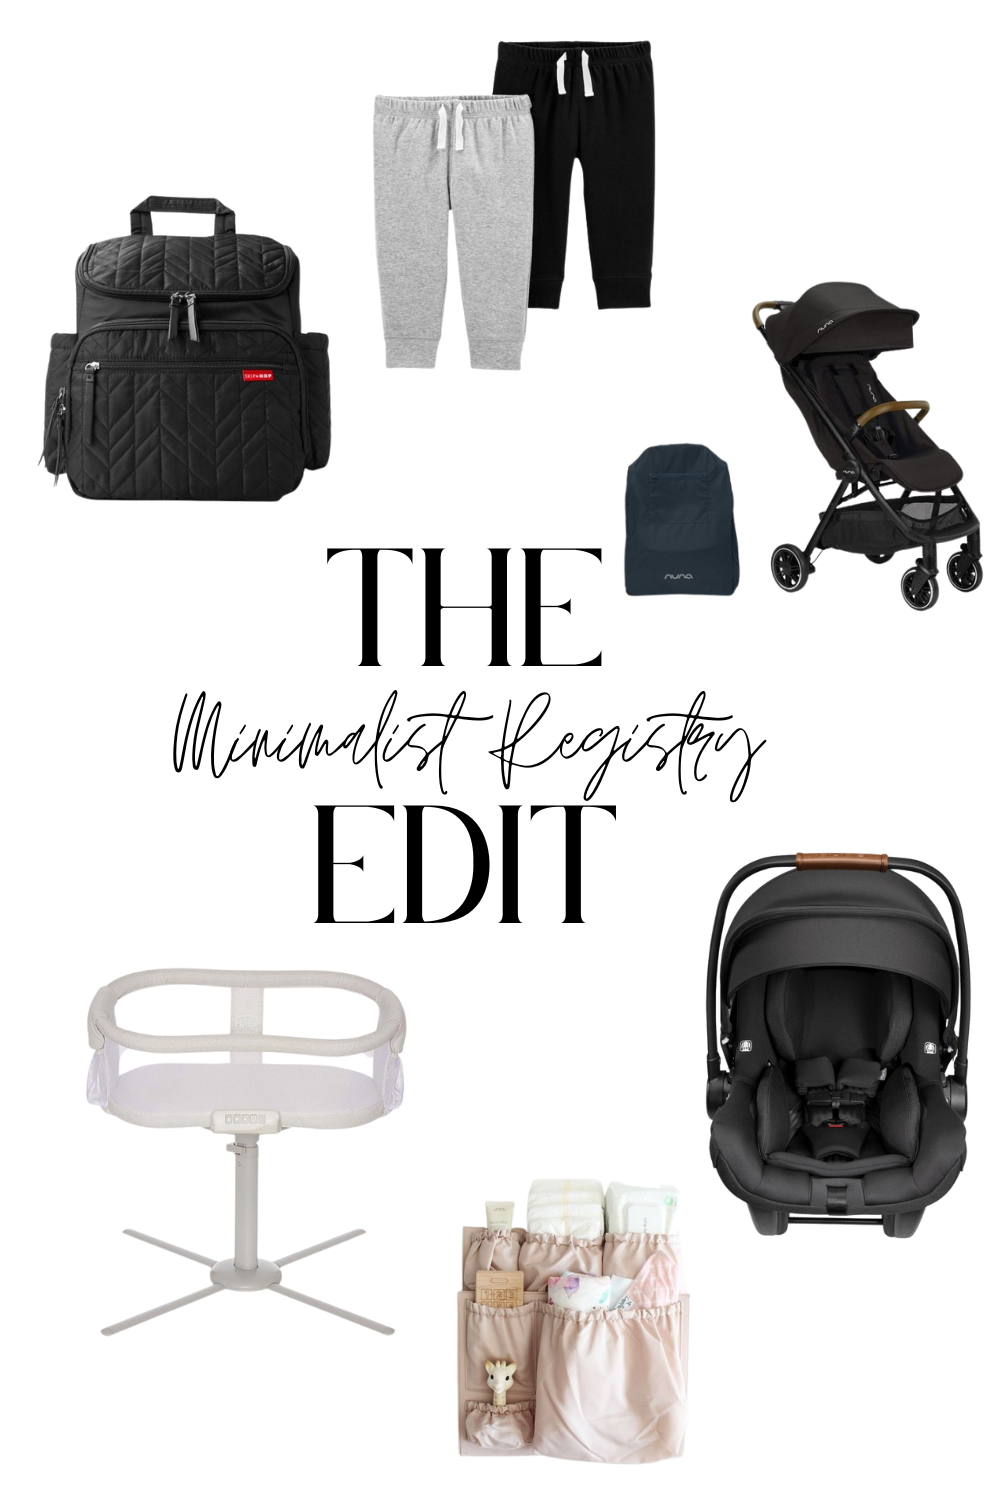 17 Must Have Items For a Minimalist Registry